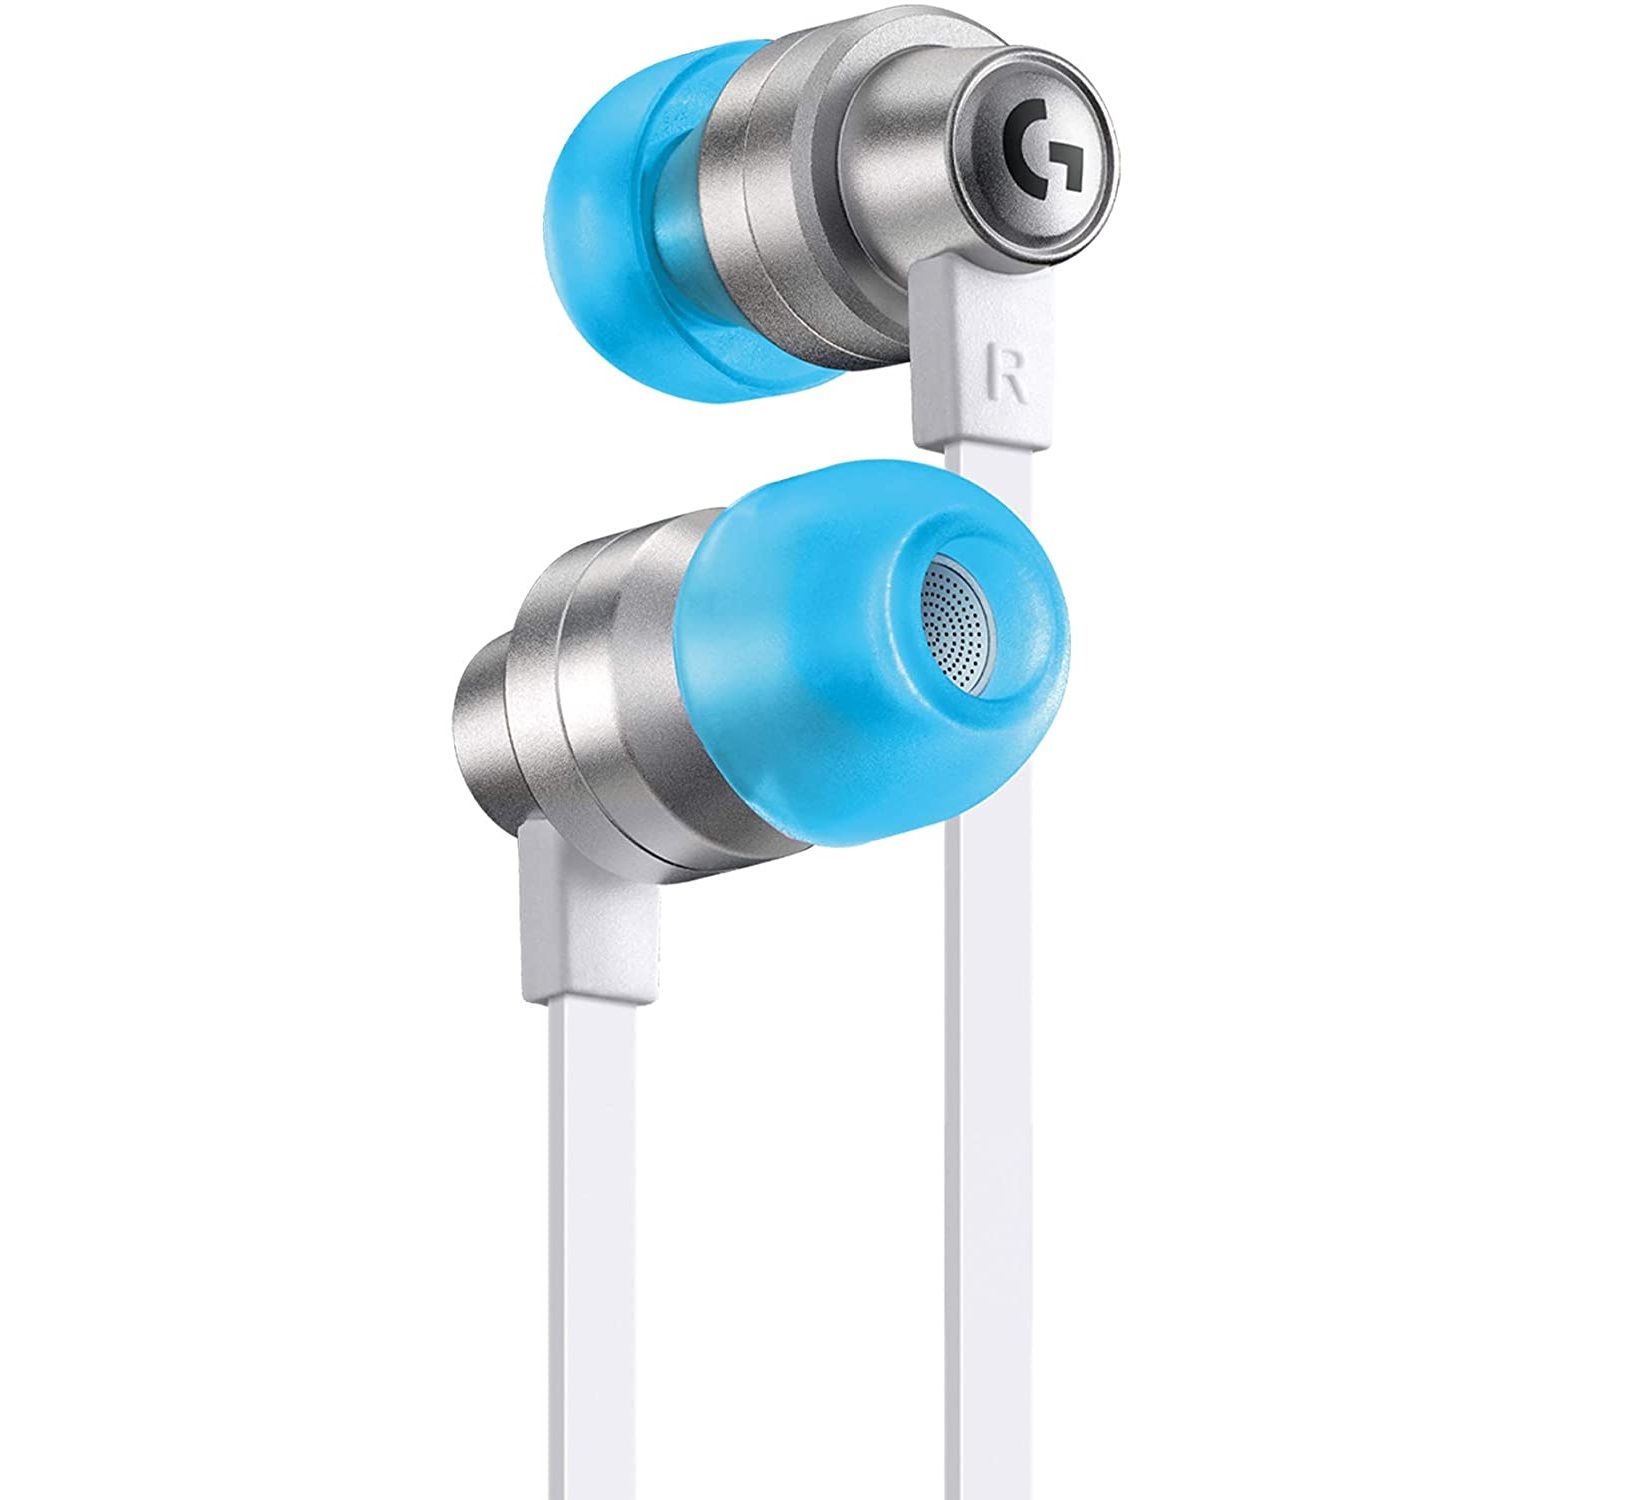 silver, white, and blue earbuds with Logitech logo